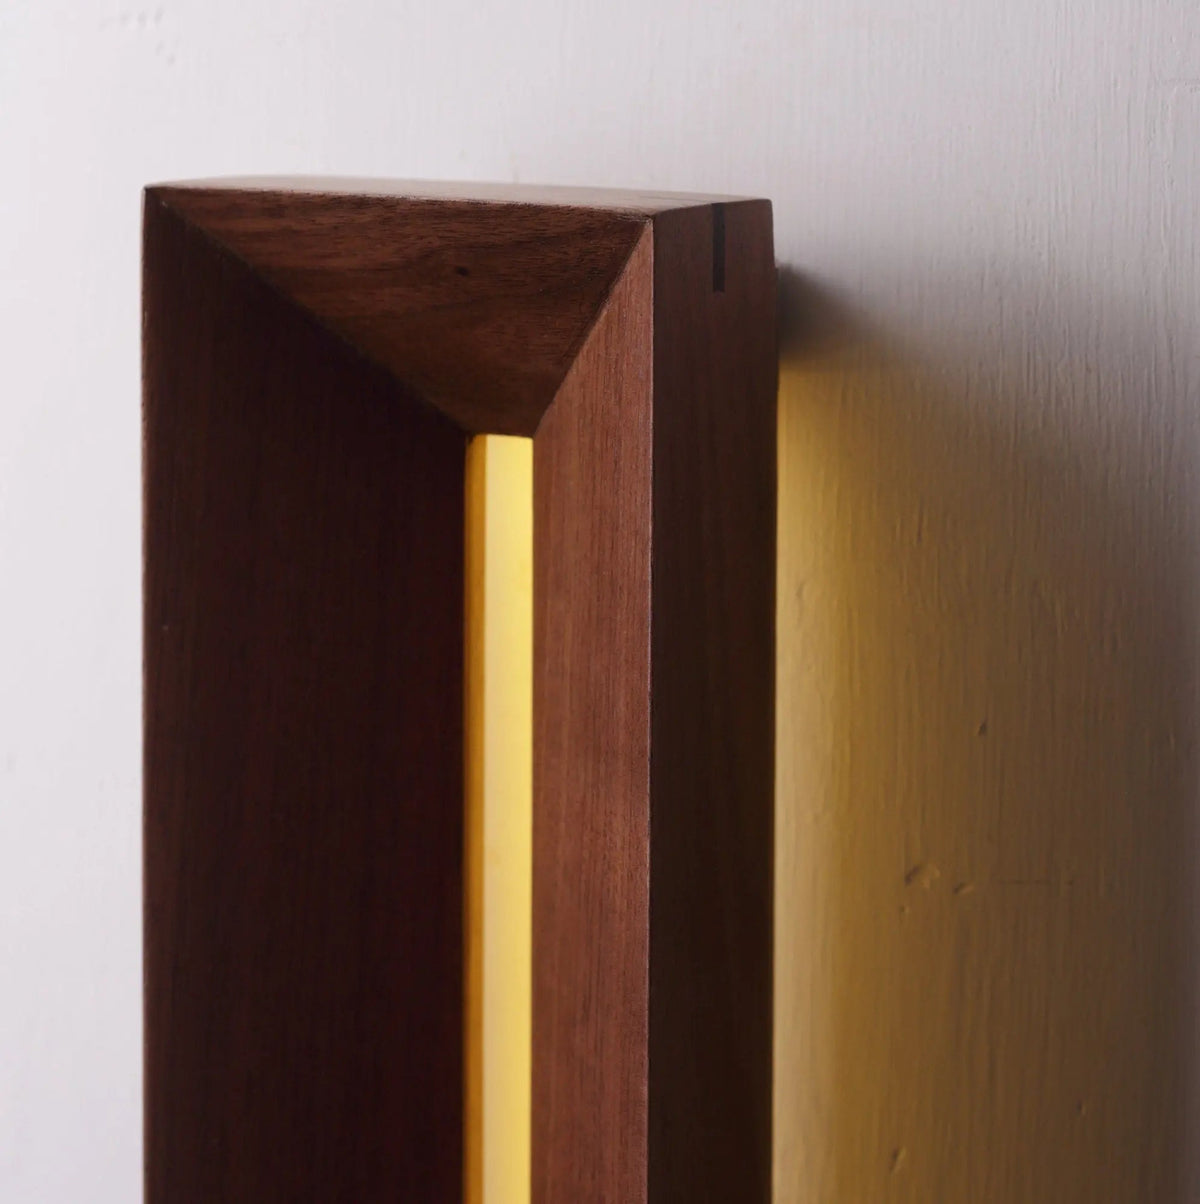 Wood Wall Light On Wooden